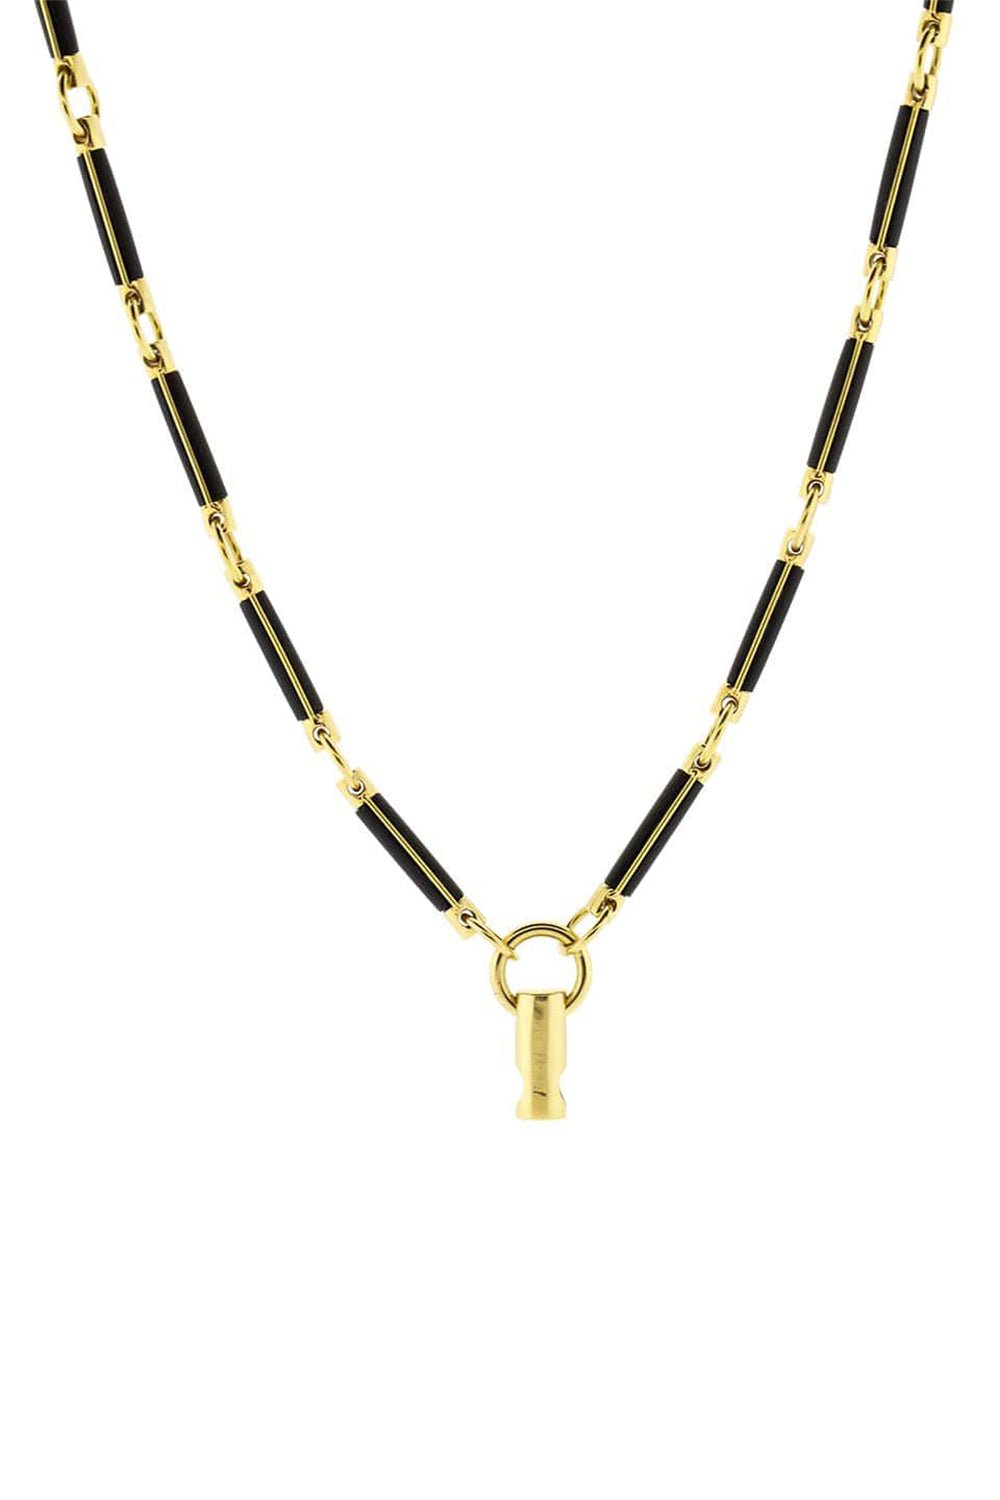 FOUNDRAE-Onyx Element Clock Weight Chain-YELLOW GOLD